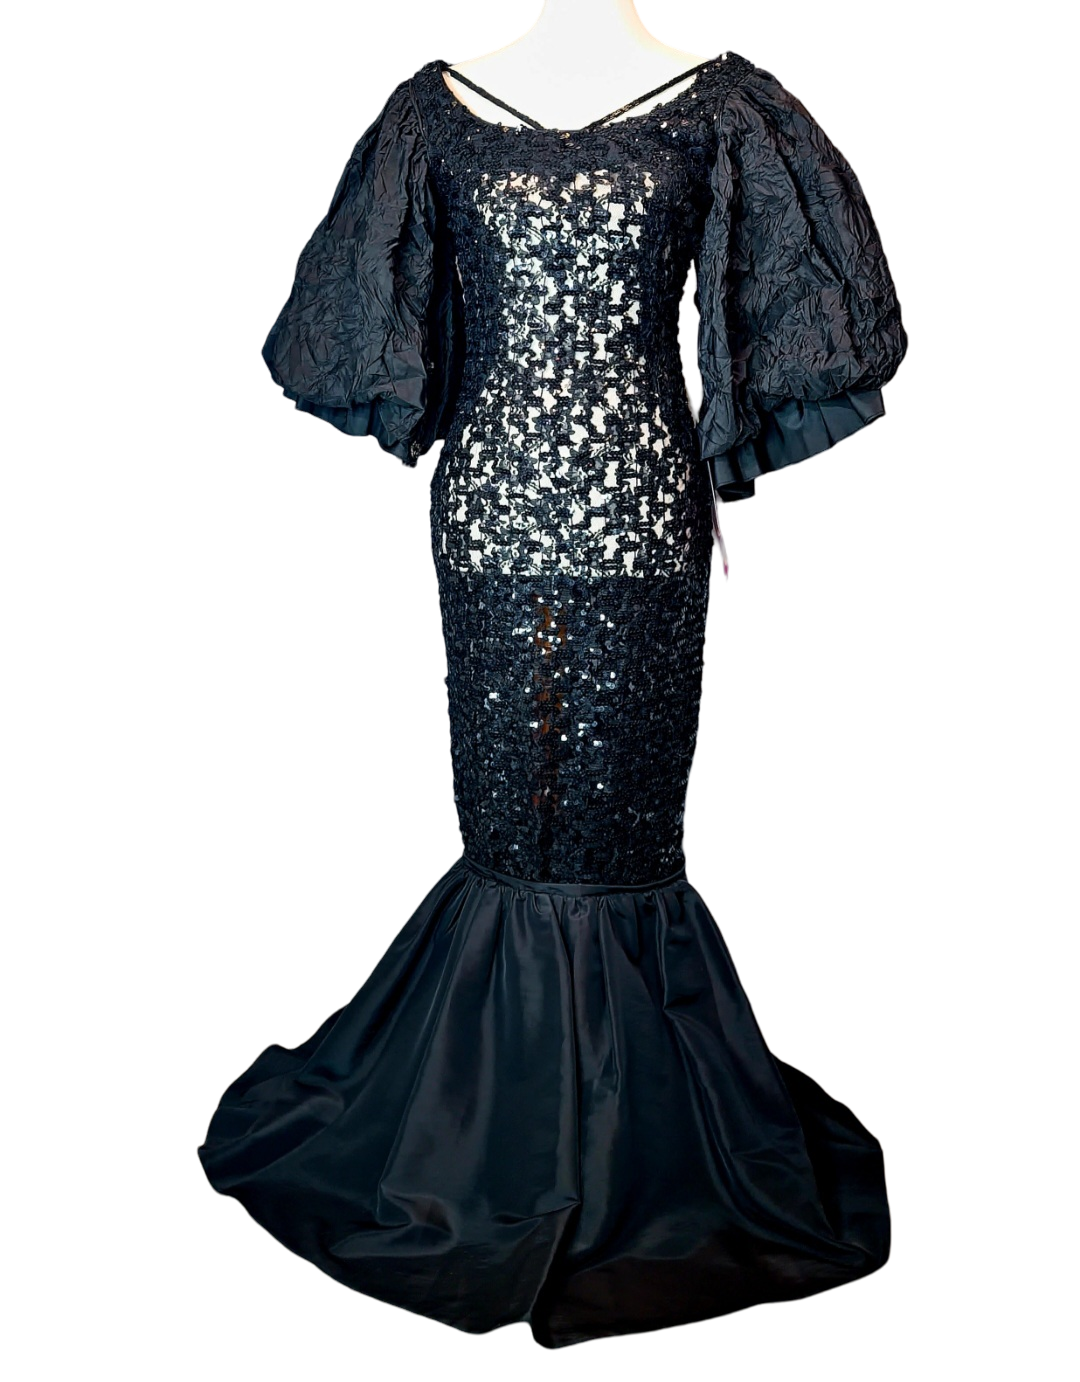 Campana Mermaid Dress. Couture sophisticated. Red carpet look. We love everything about this dress. Screams sophisticated.  Mermaid dress with big ruffle sleeves.  See through, add your undergarment to your liking. It's all in the details...